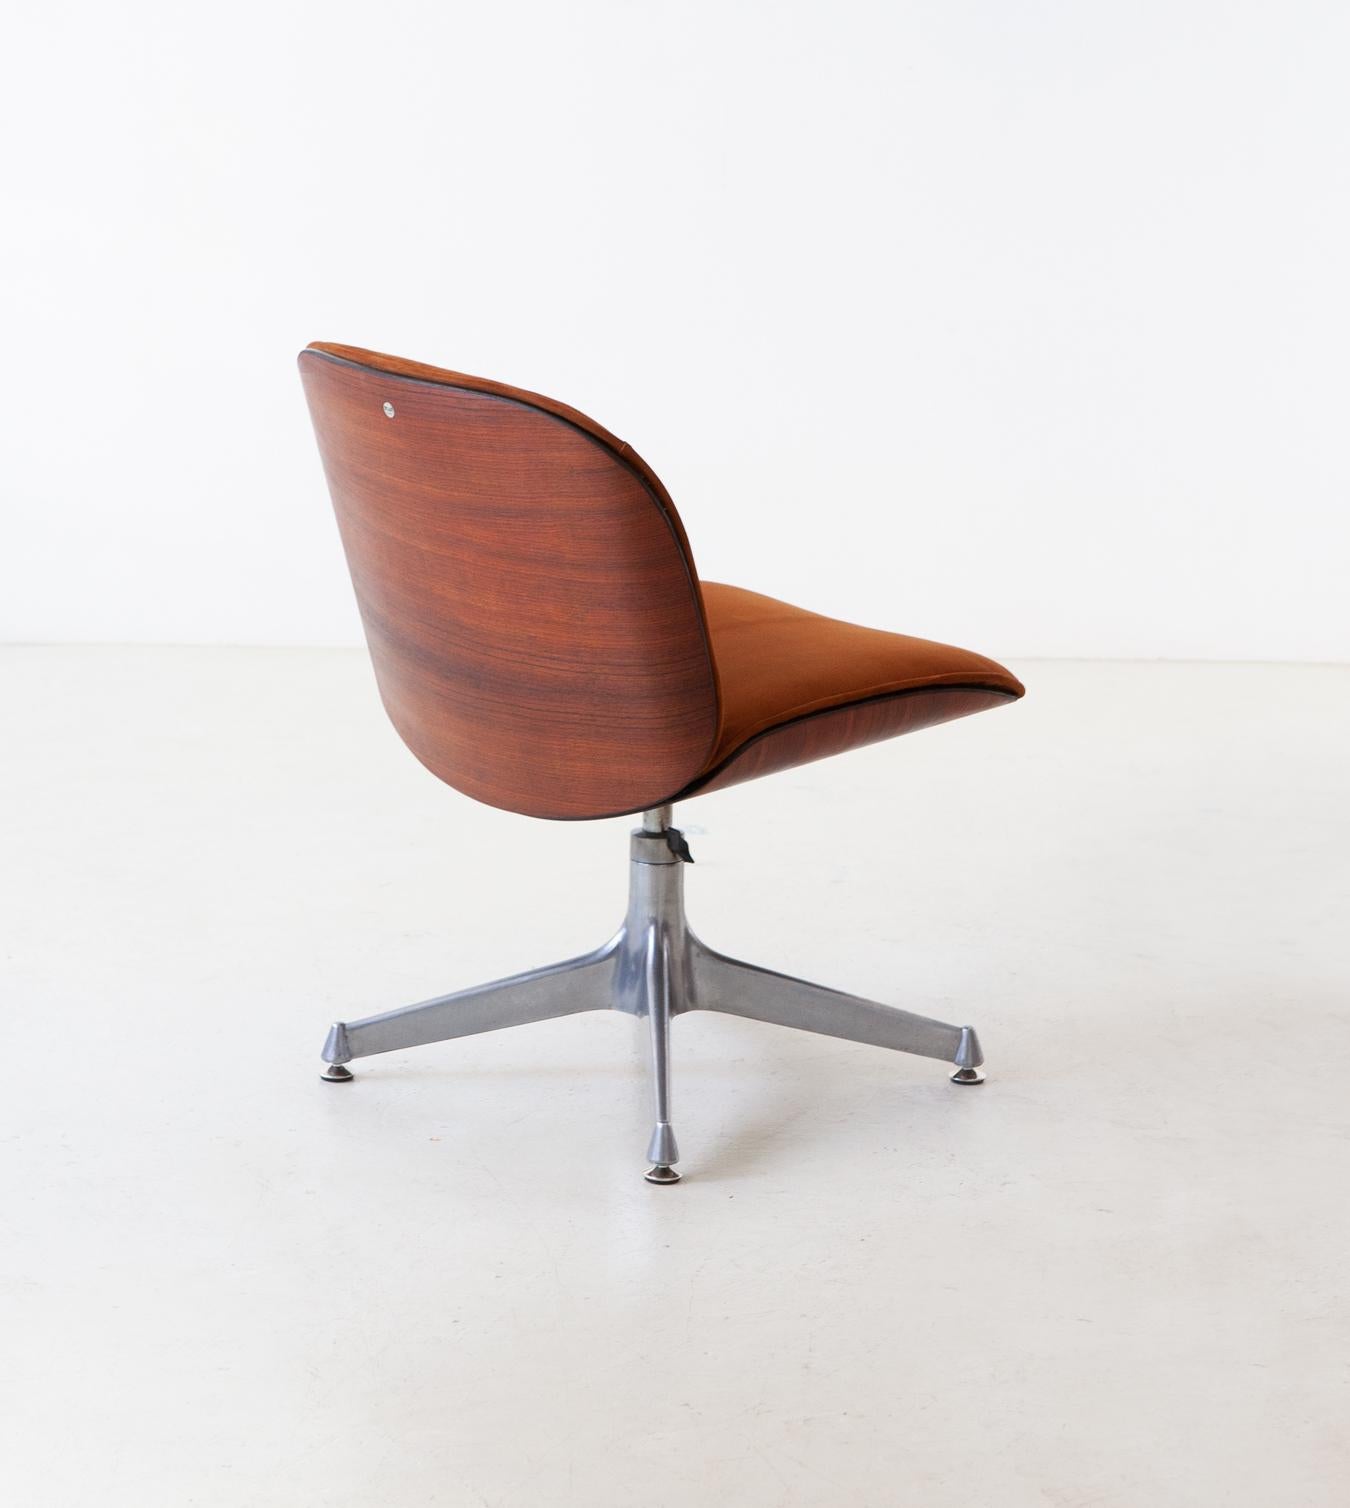 Modernist swivel chair designed by Ico Parisi and produced by M.I.M. (Mobili Italiani Moderni) Roma, Italy

Fully restored exotic wood veneered frame with a deep sanding of the original finishing , then a light hand of natural shellac. 
Metal